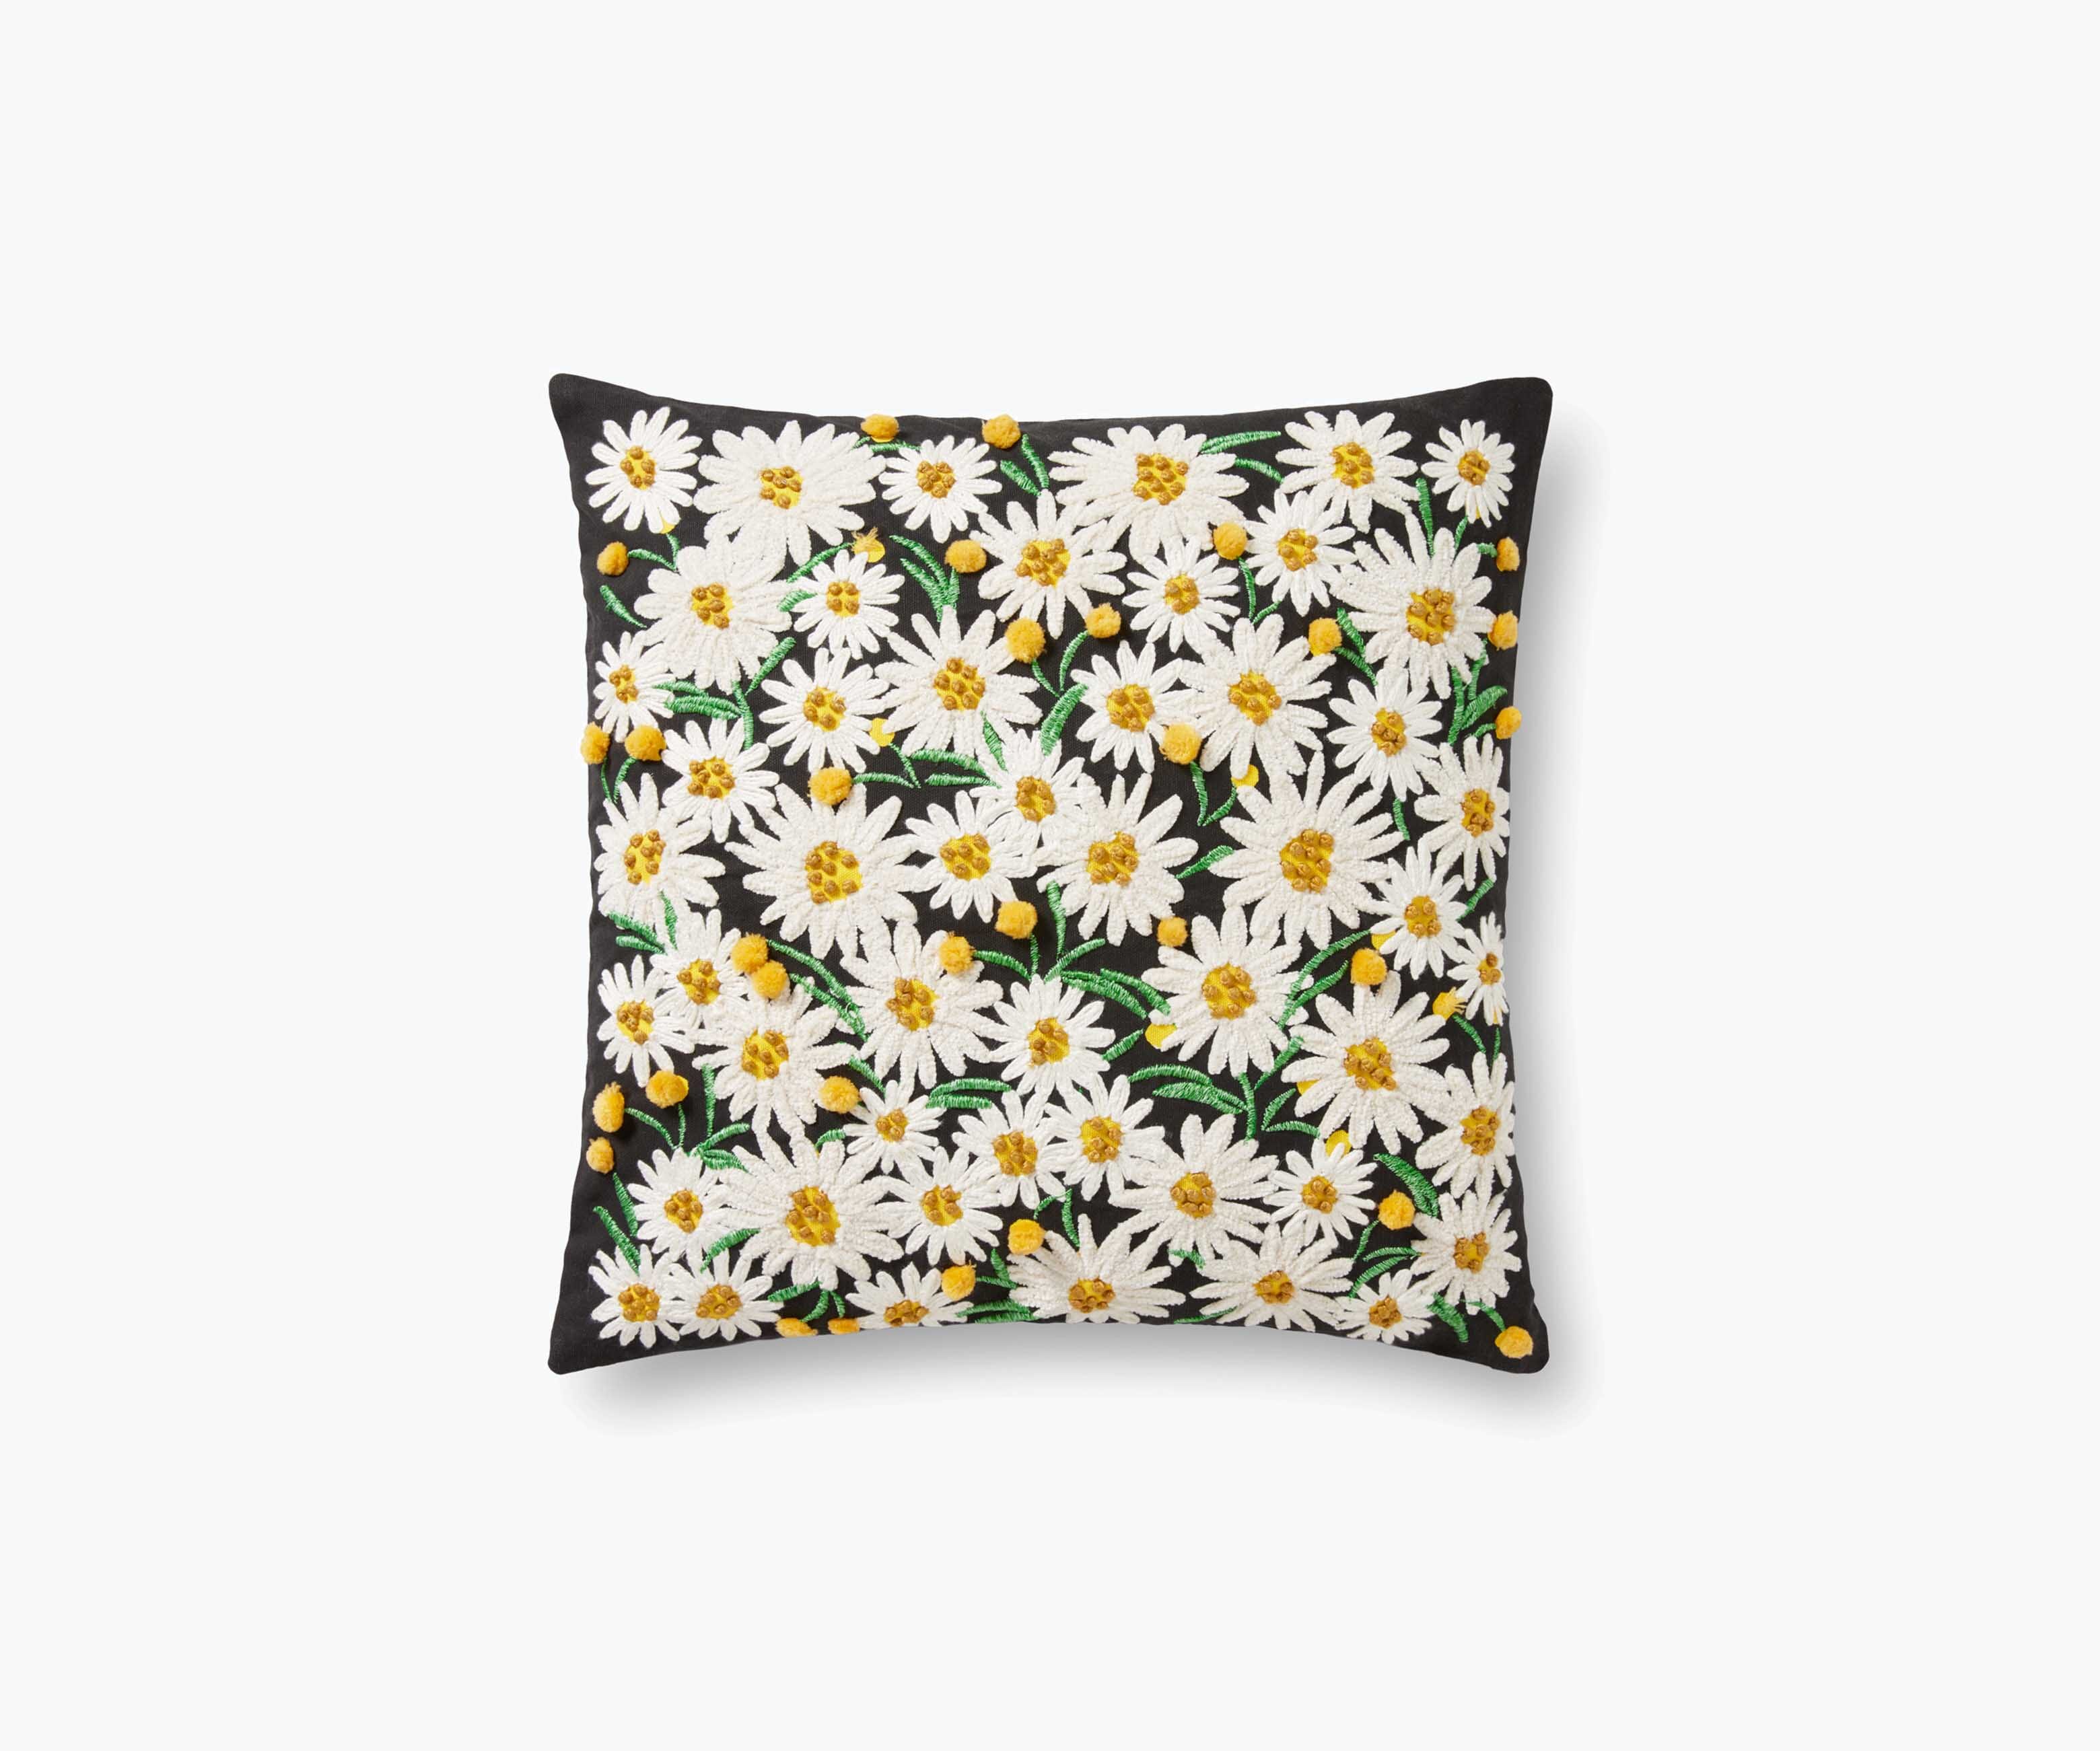 Daisies Embroidered Pillow | Rifle Paper Co.